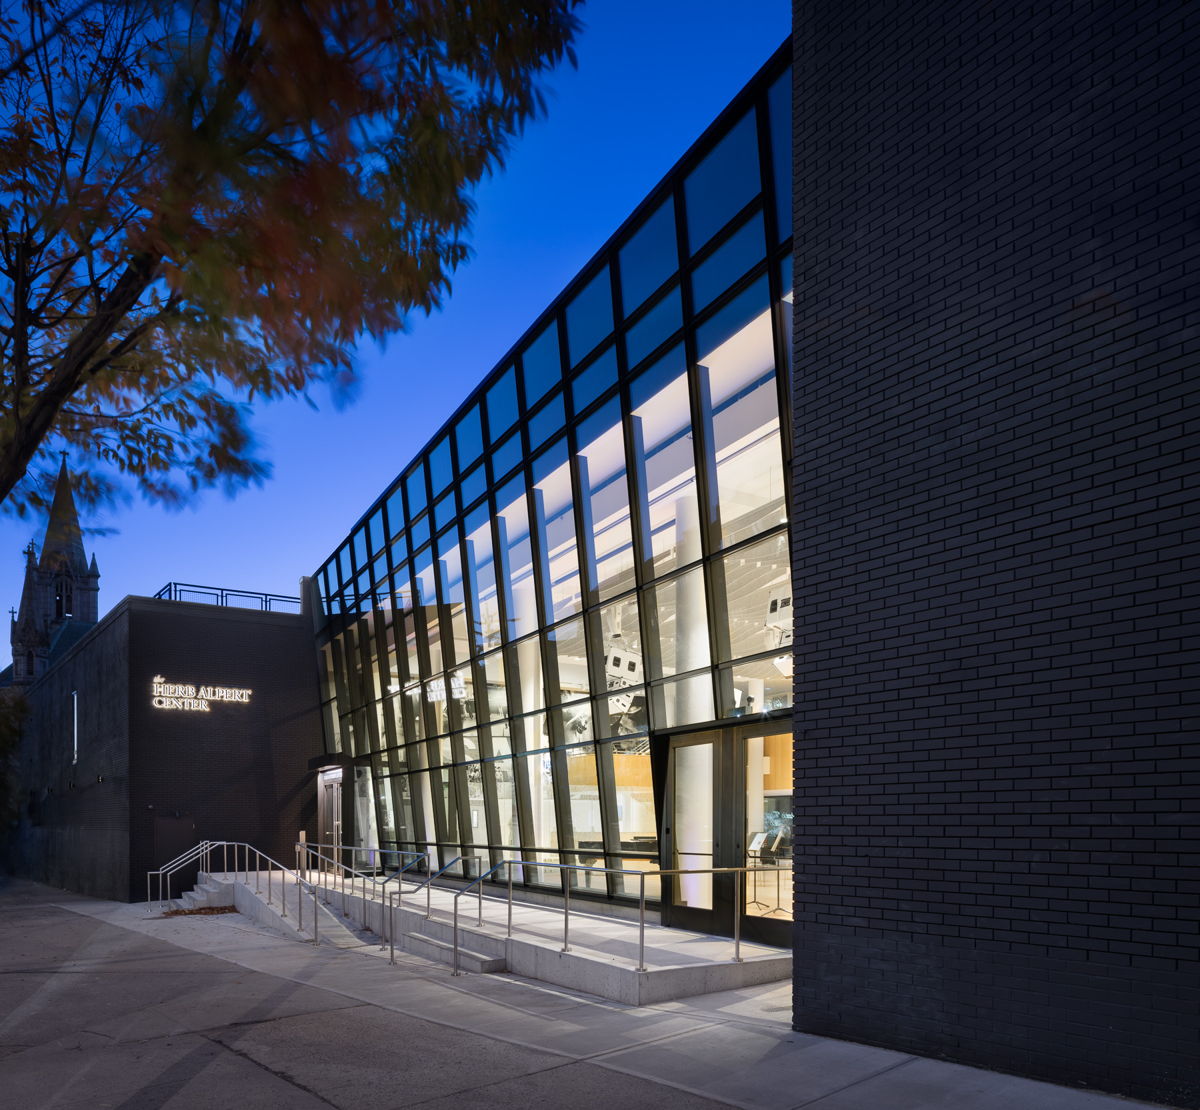 The new 3,500 square-foot entrance of the HSA was conceived as a visual reflection of the school’s ongoing legacy; a welcoming space for aspiring artists that would realize the dreams of founder Dorothy Maynor. - Photo by Amy Barkow